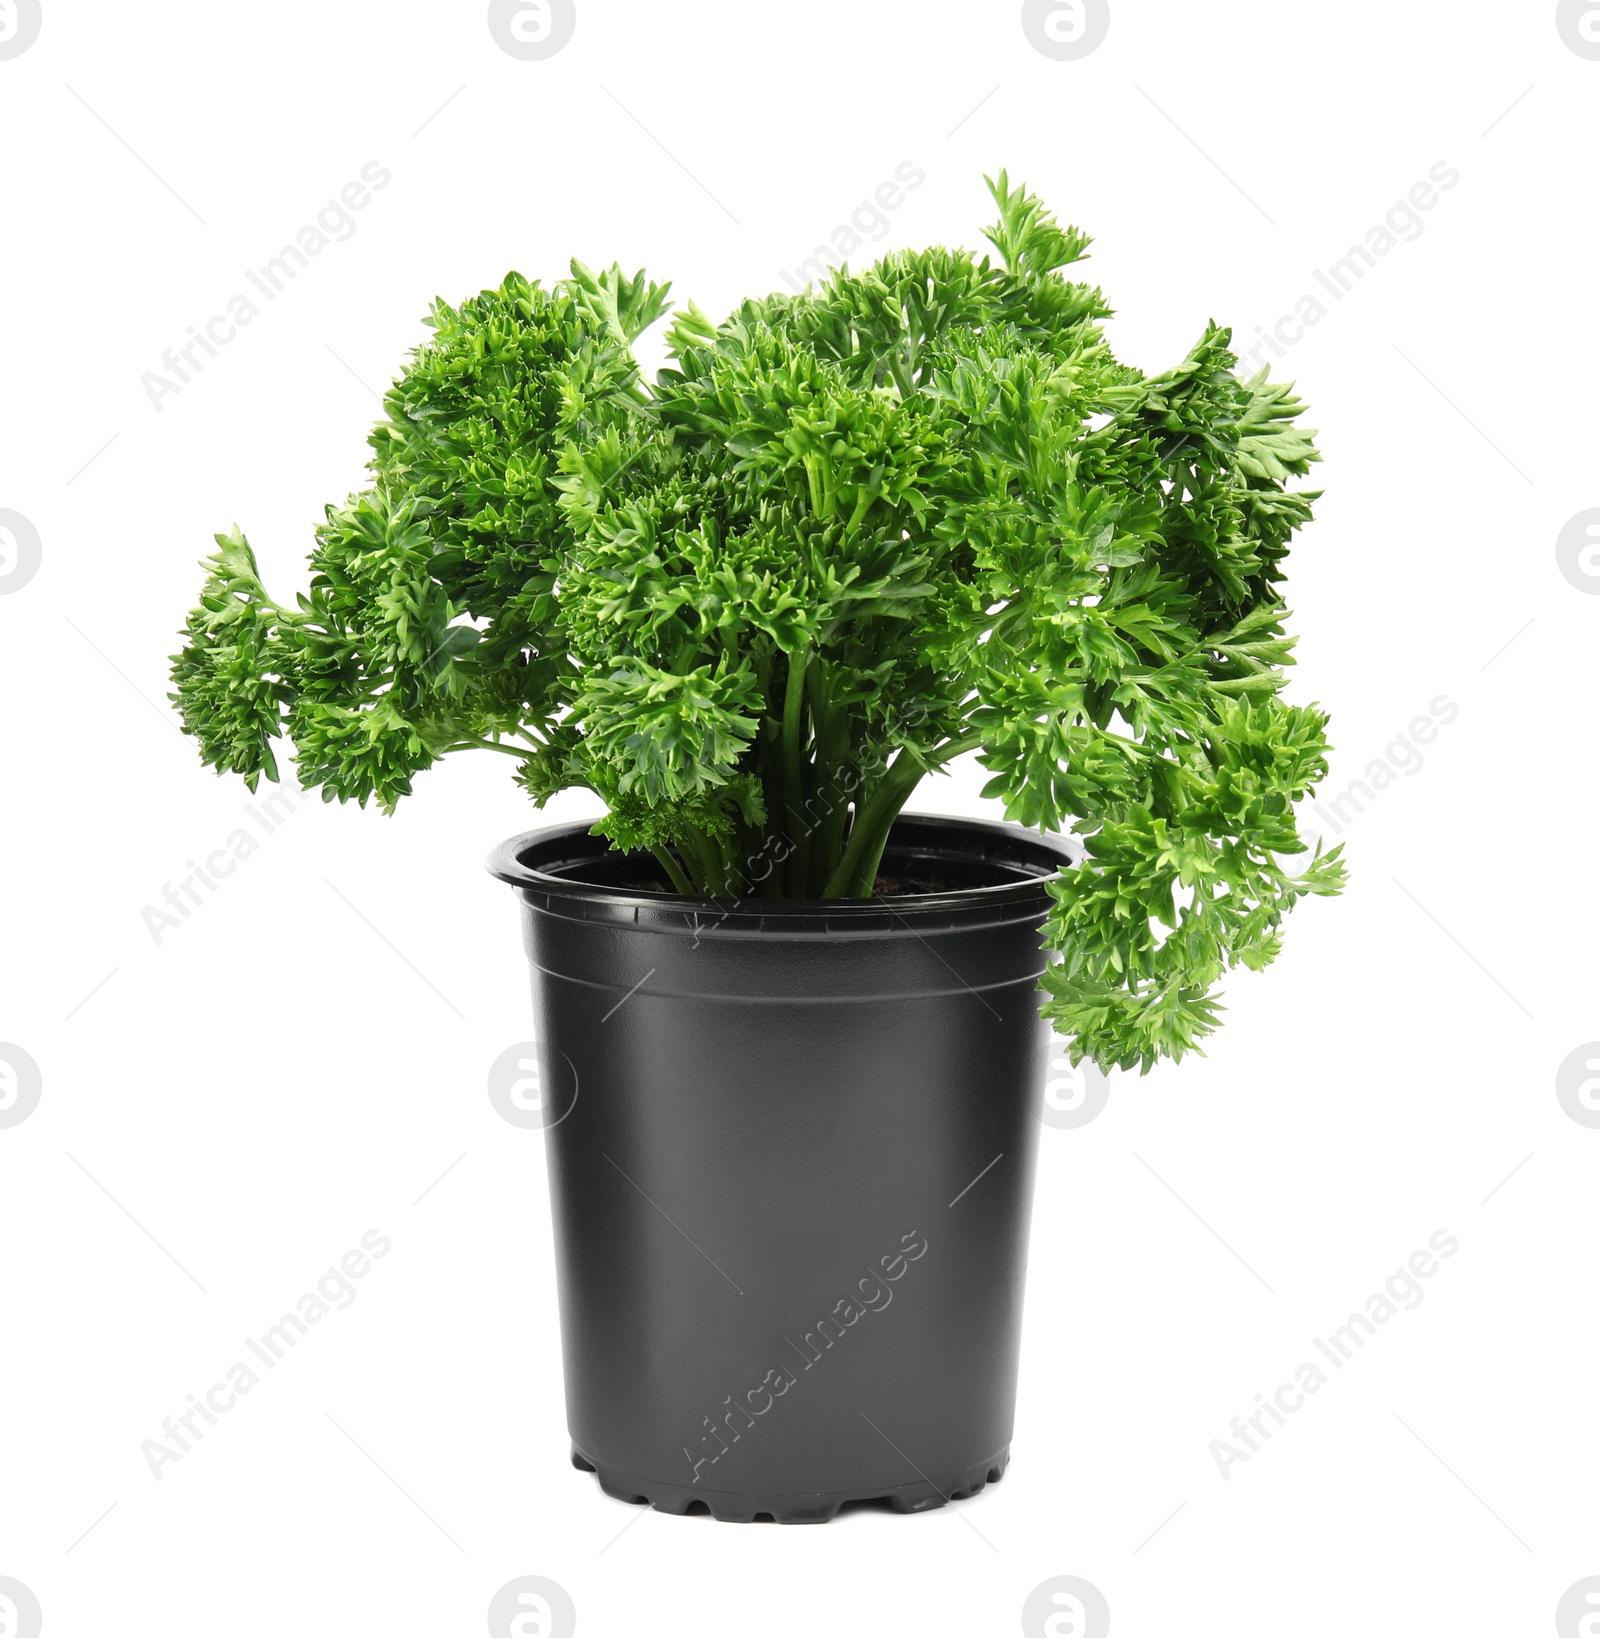 Photo of Fresh green organic parsley in pot on white background